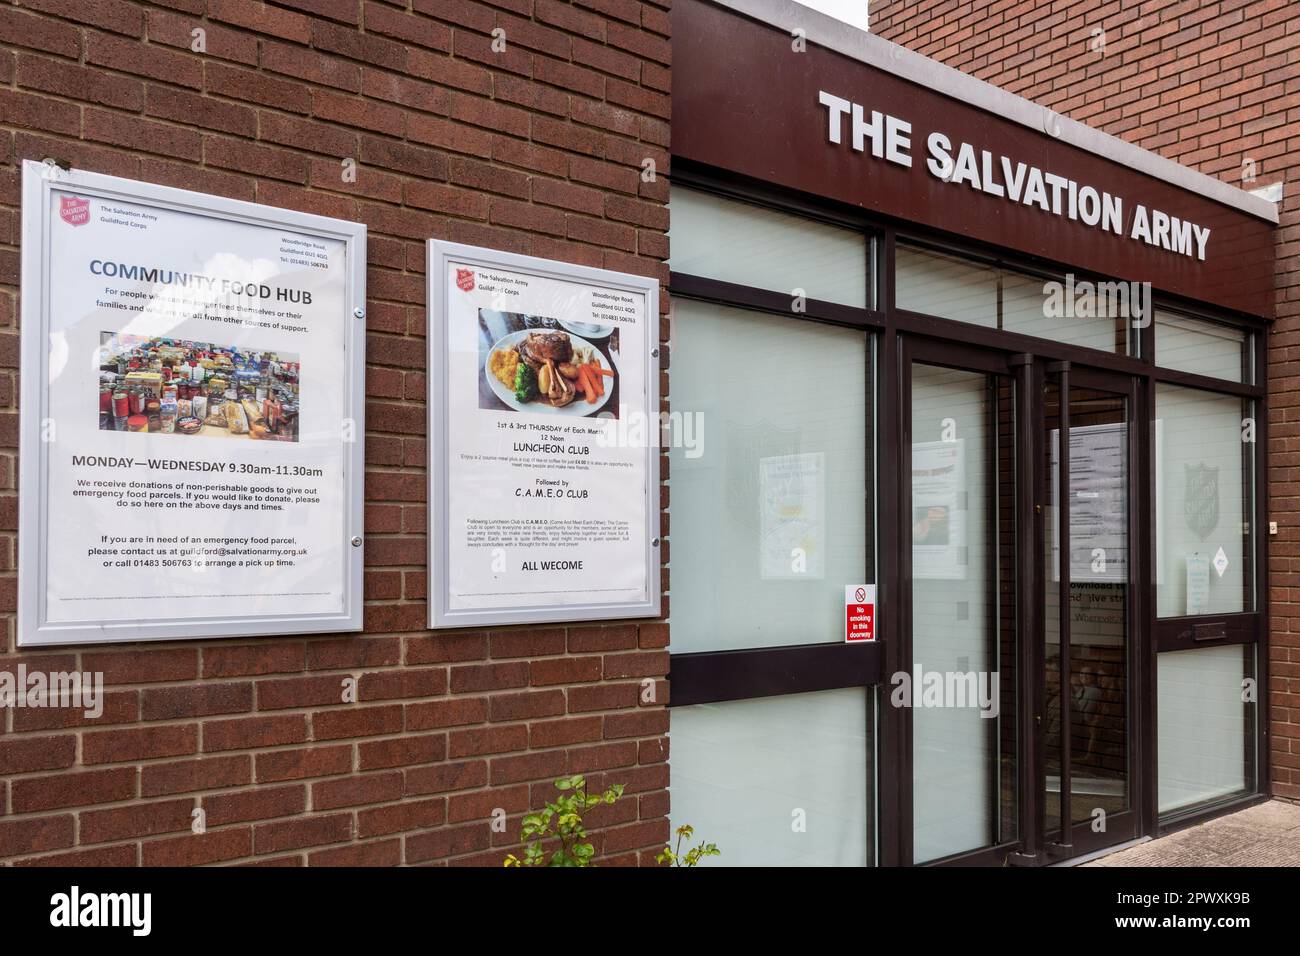 The Salvation Army church and community centre in Guildford town, with notice about a community food hub, Surrey, England, UK Stock Photo